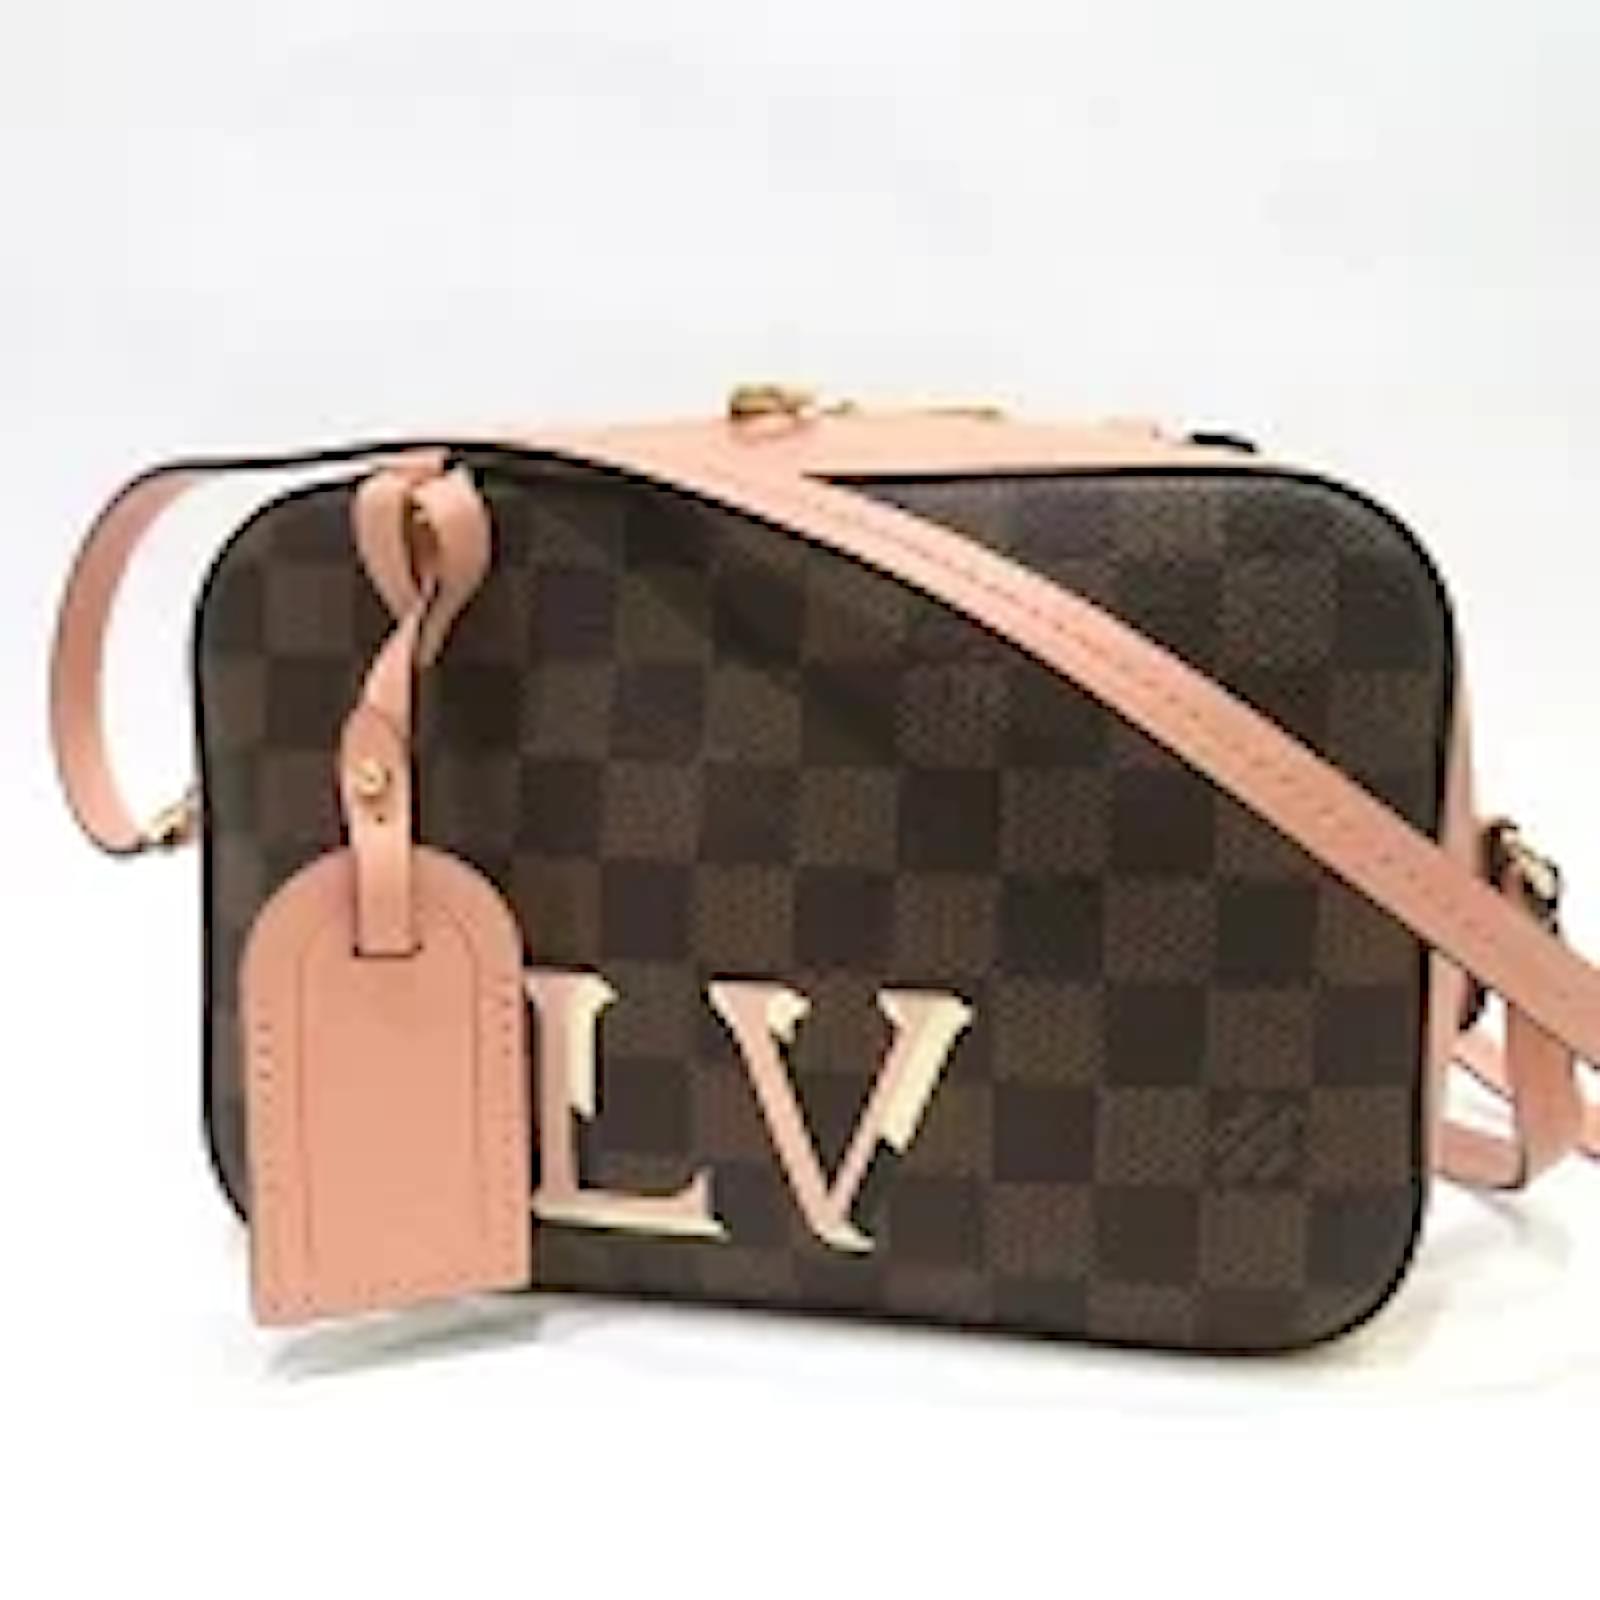 Most Popular Louis Vuitton Bags RANKED! *LV RANKED* 